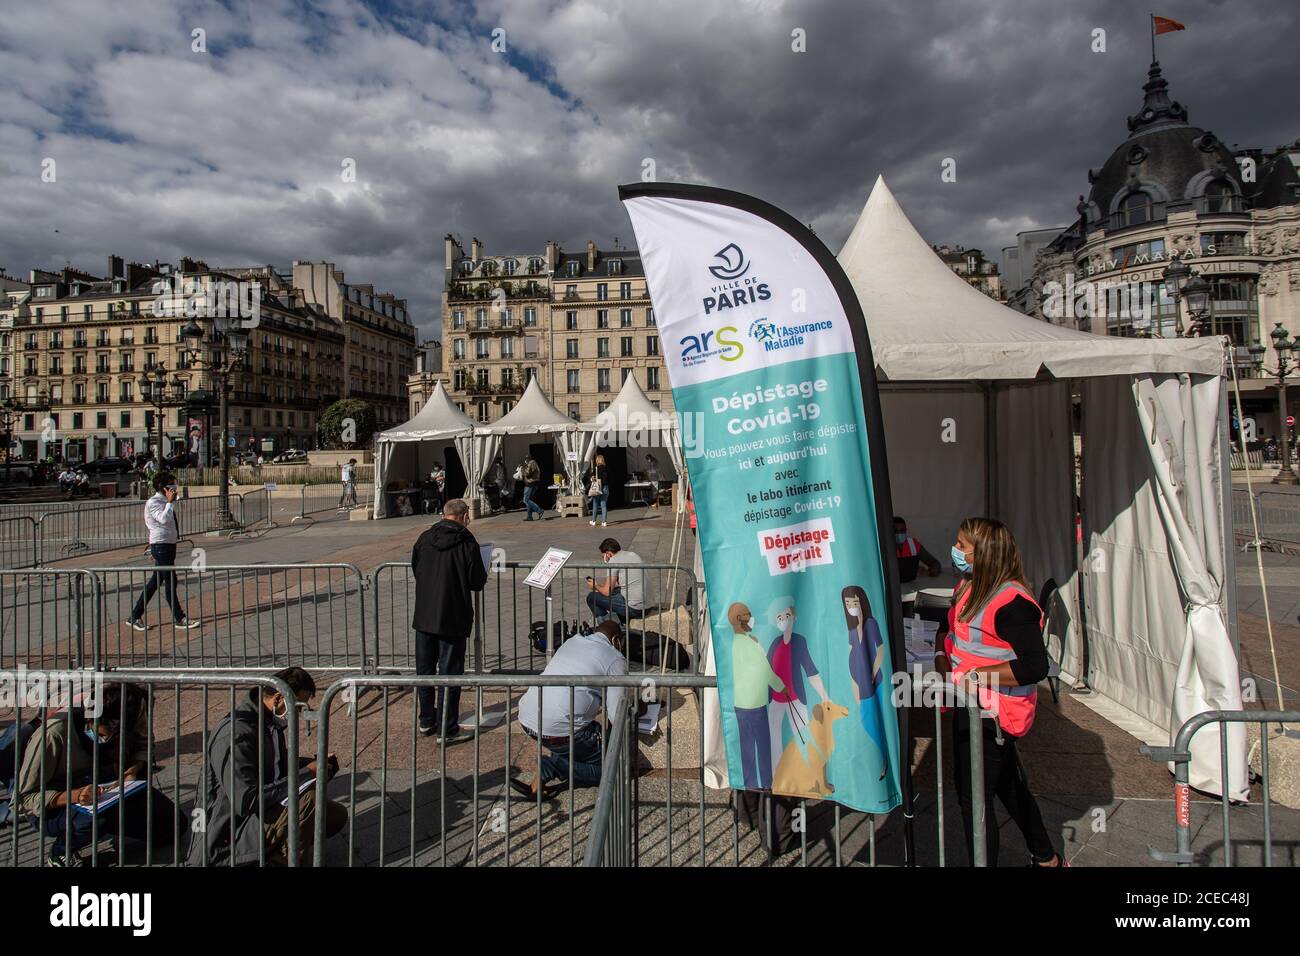 (200901) -- PARIS, Sept. 1, 2020 (Xinhua) -- People queue up at a temporary screening center for COVID-19 PCR tests in front of the city hall of Paris, France, Aug. 31, 2020. COVID-19 screening centers were set up in Paris on Monday, inviting Parisians to free tests after their return from vacation. These temporary centers will be operating in all of the French capital's arrondissements. Coronavirus infections have surged in France in recent weeks, particularly among young people, prompting the government to make mask-wearing mandatory outdoor and at workplace. (Photo by Aurelien Morissard Stock Photo